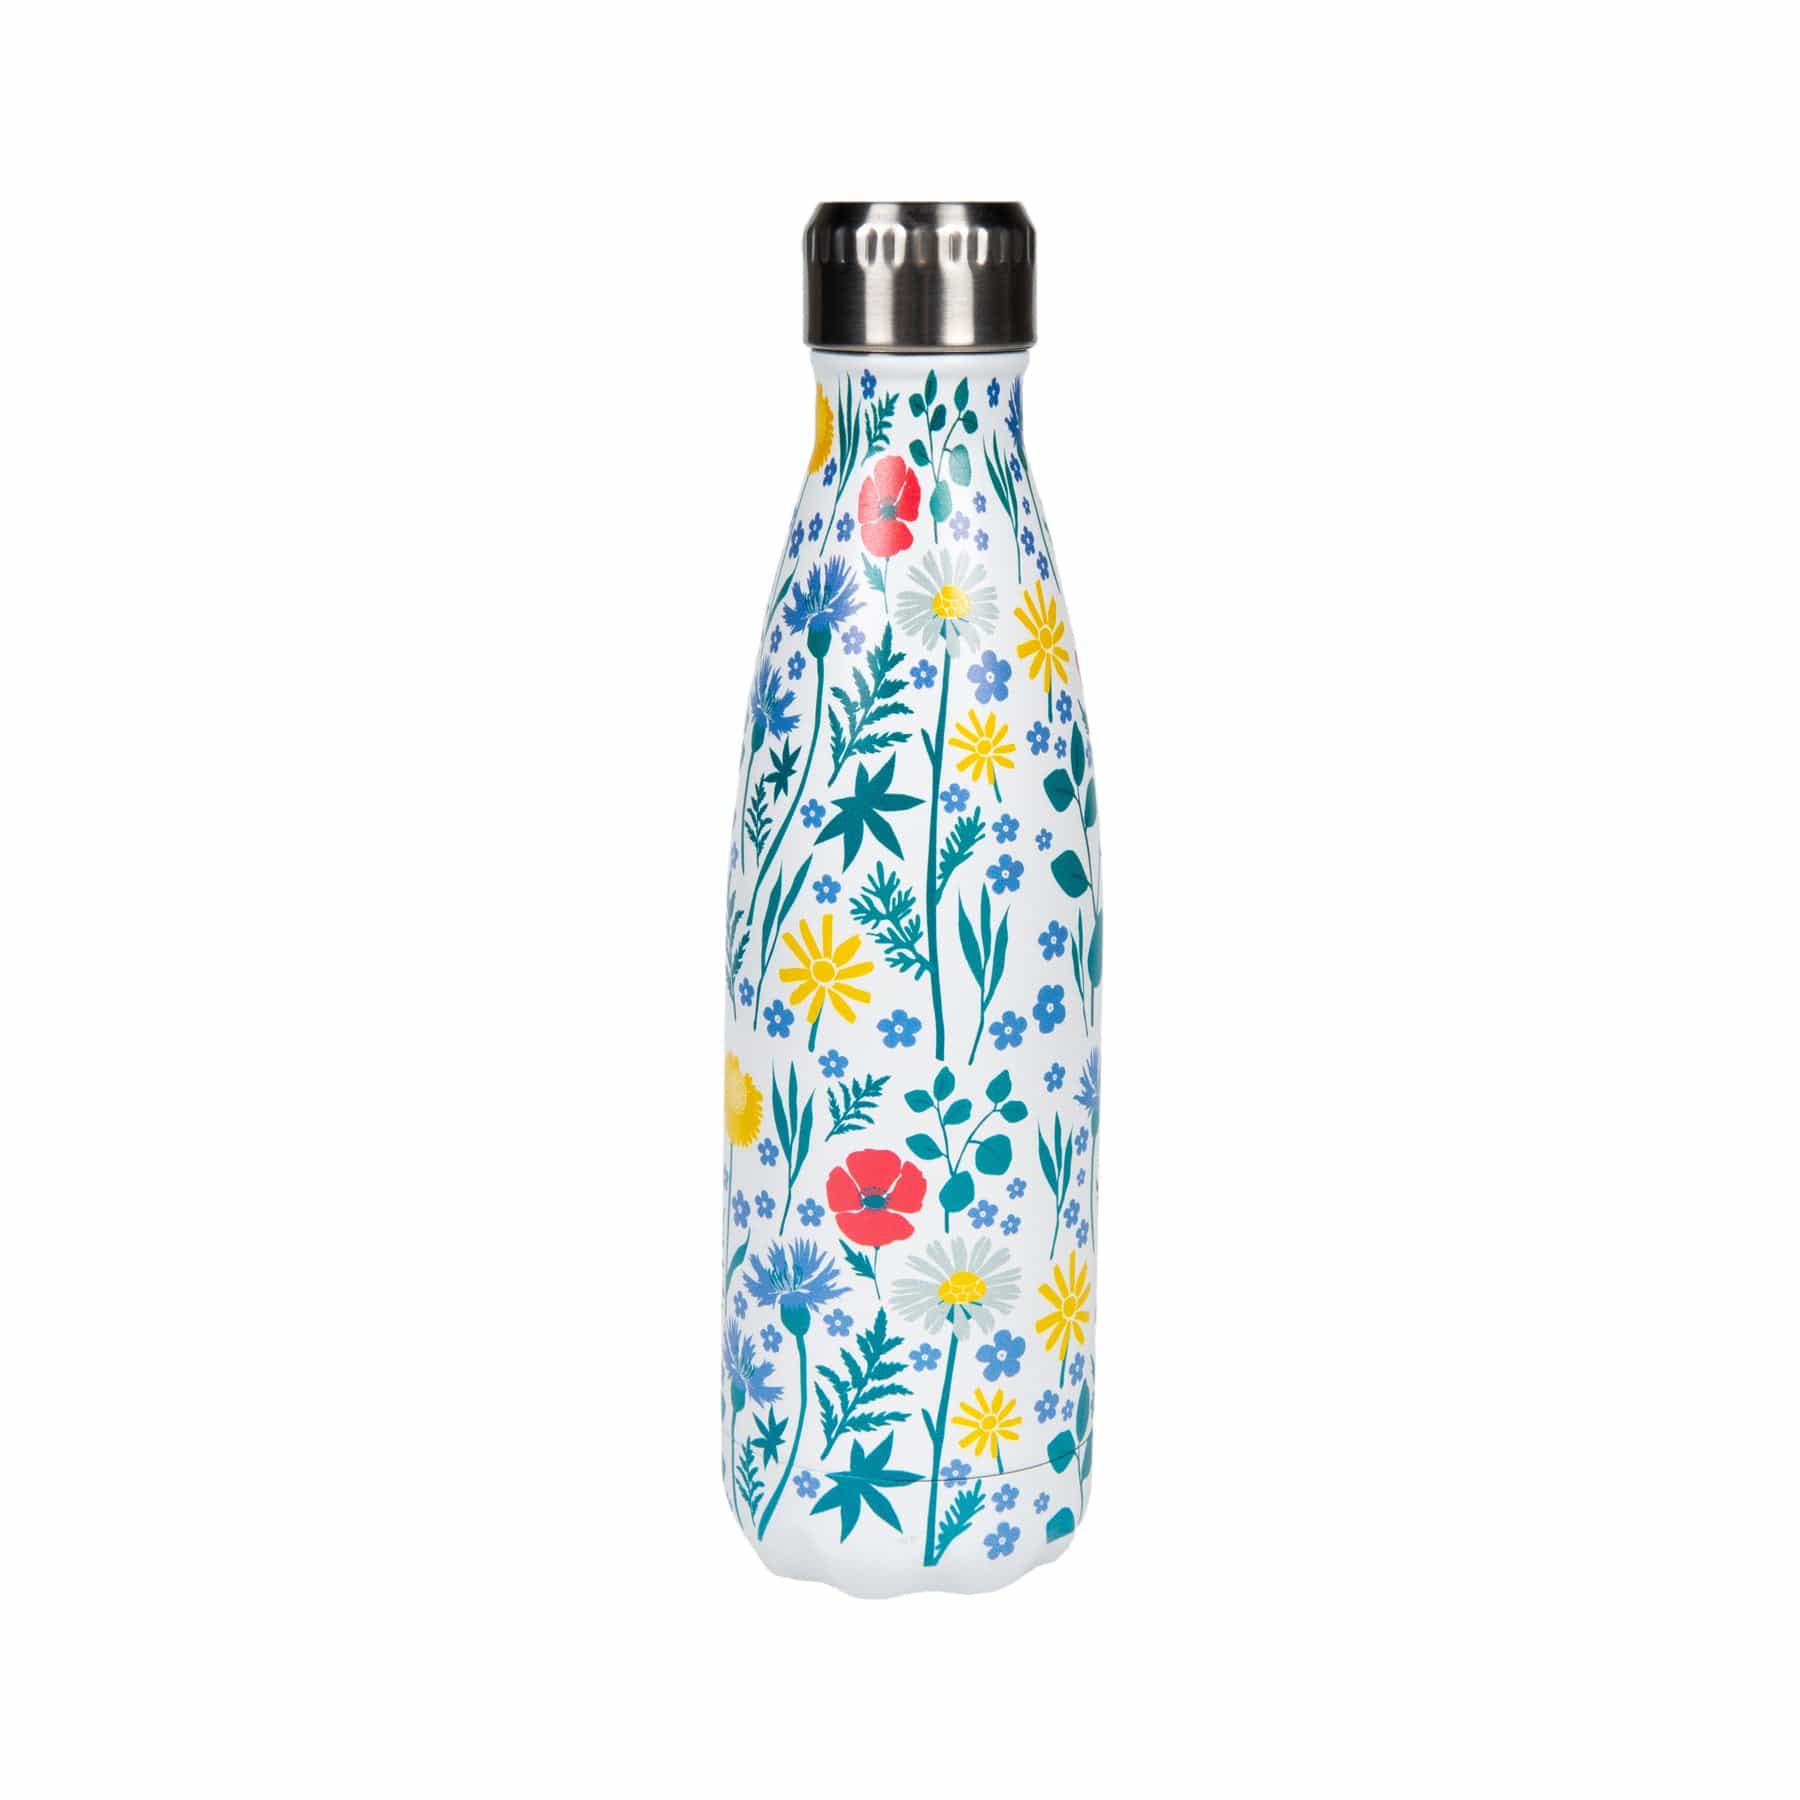 Insulated stainless steel water bottle with floral pattern on white background.